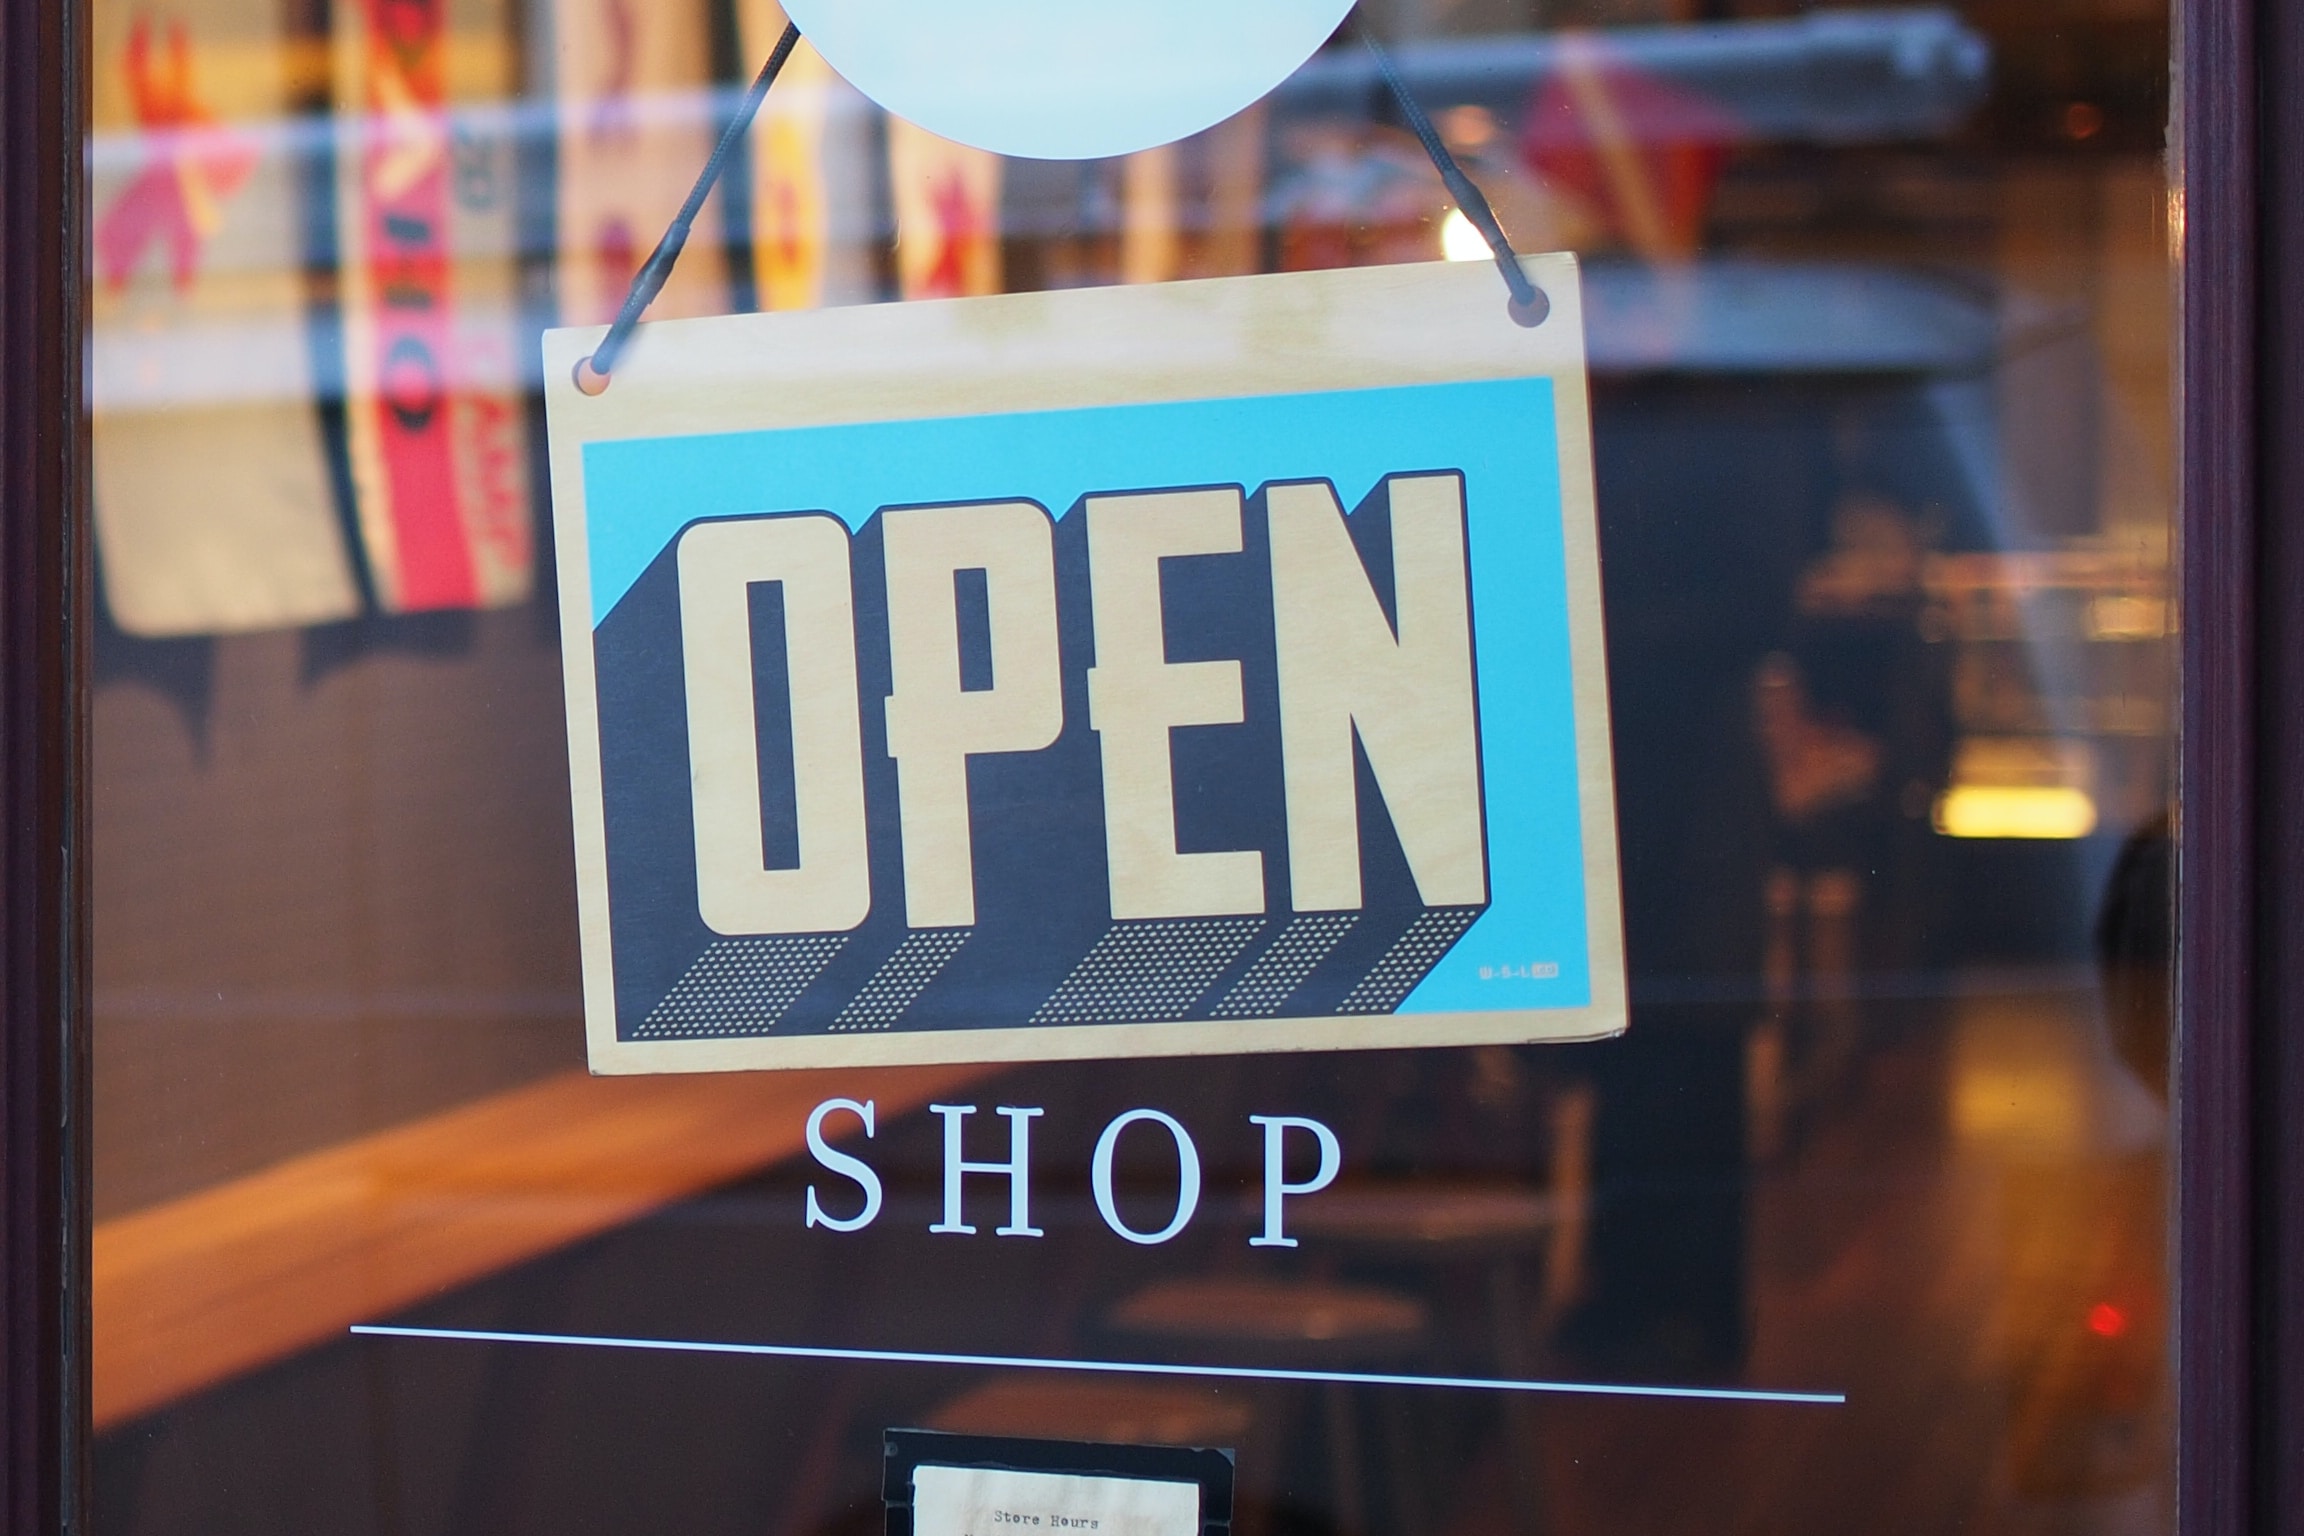 A close up of a shop sign, showing 'open' in a large font | Coop Danmark KPS